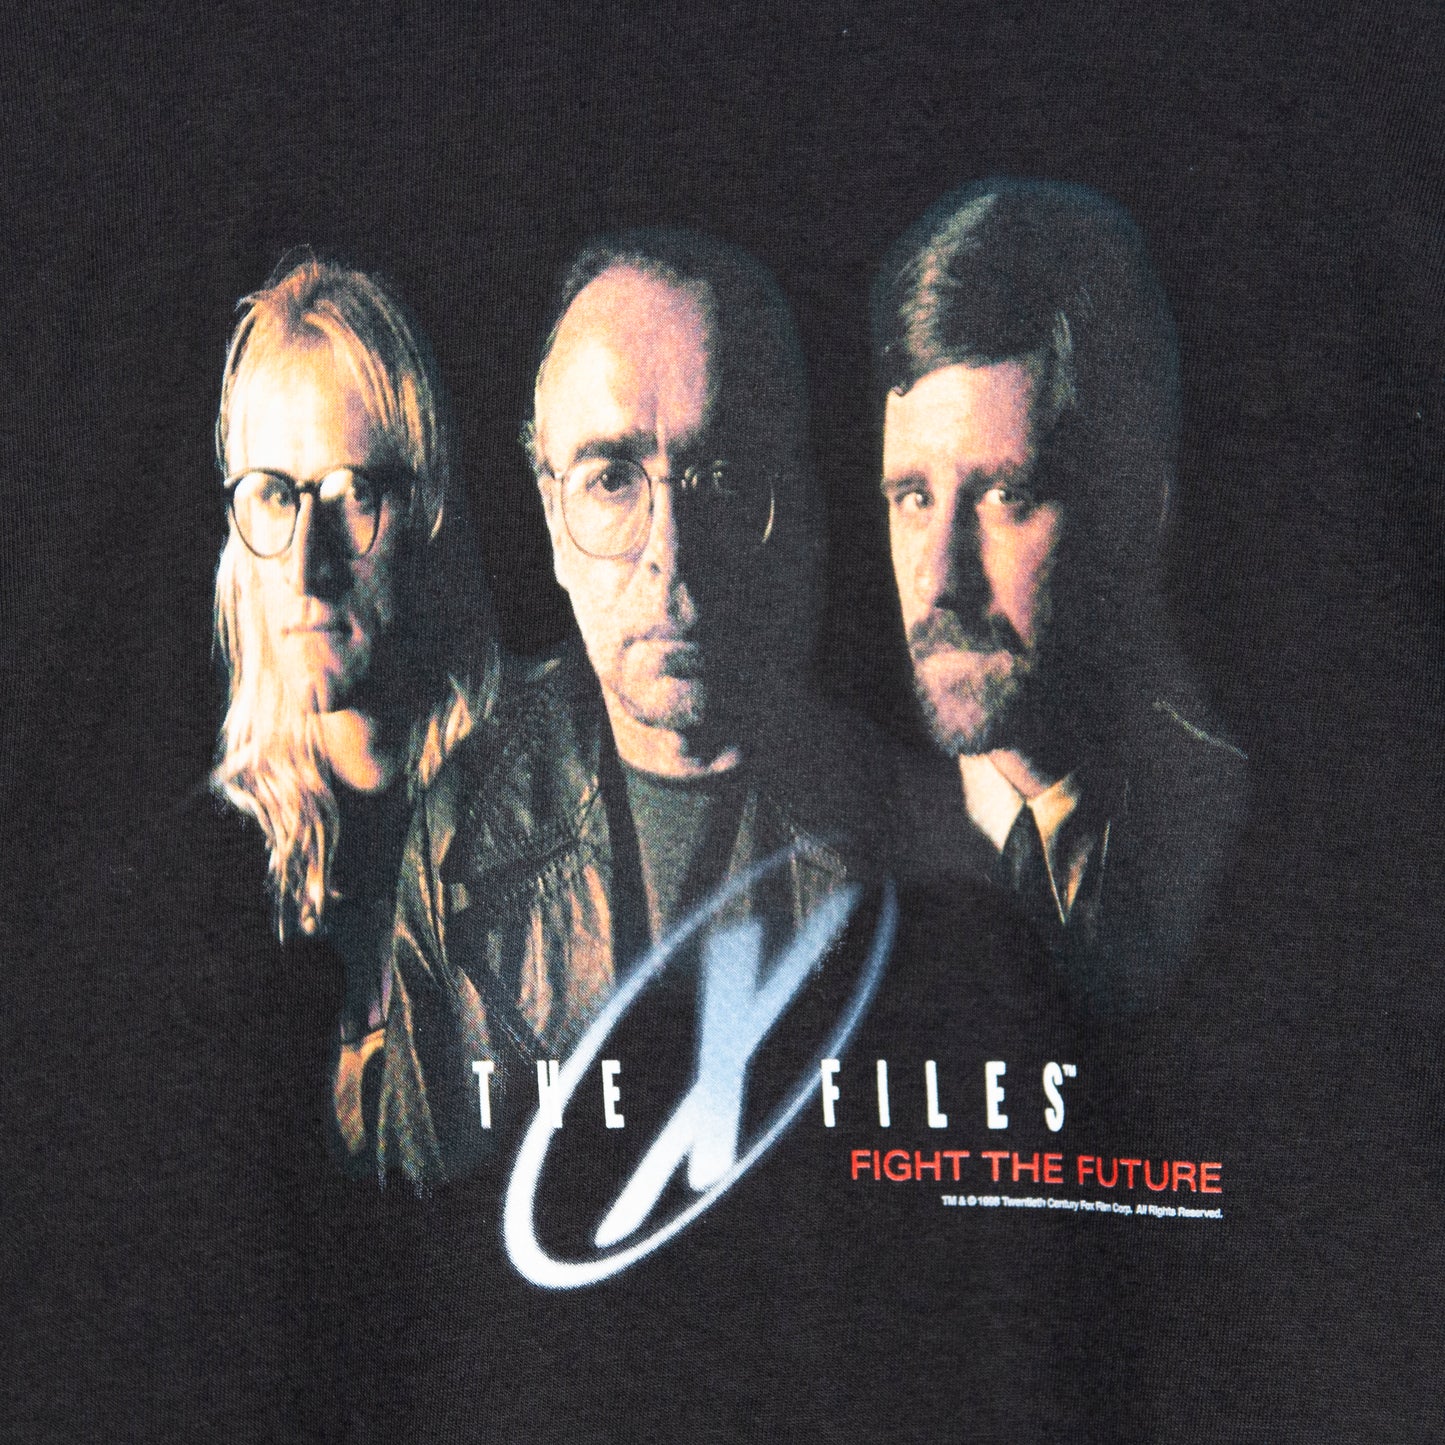 1998 The X-Files 'Fight the Future' T-Shirt Large